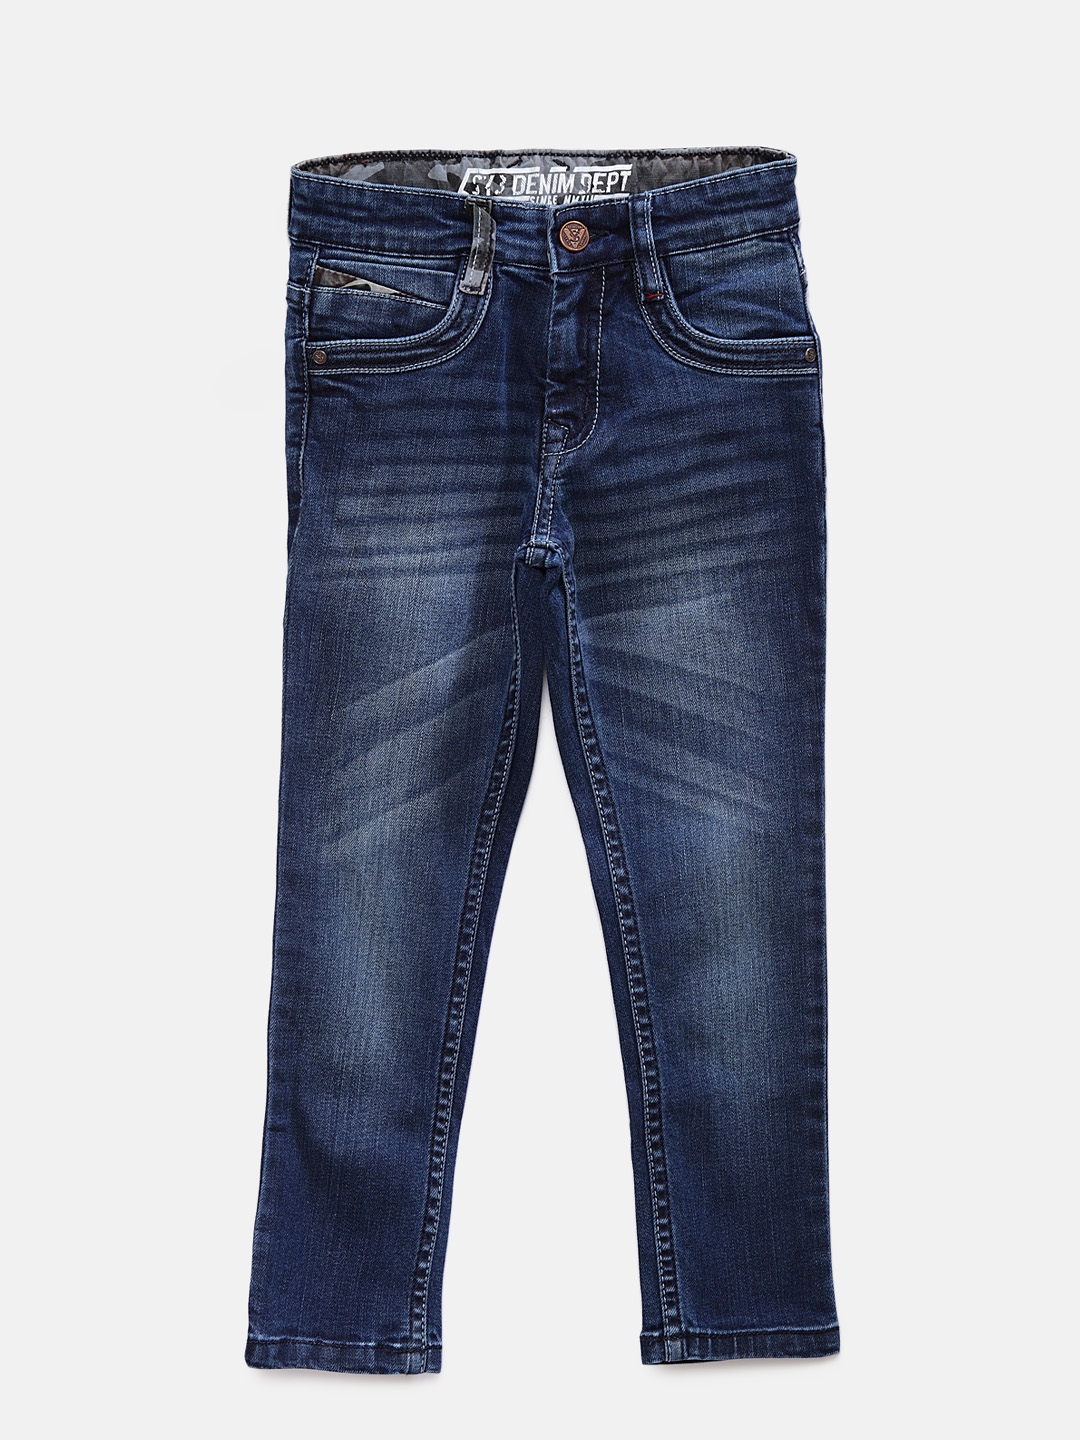 Buy Superyoung Boys Blue Slim Fit Jeans - Jeans for Boys 10074059 | Myntra